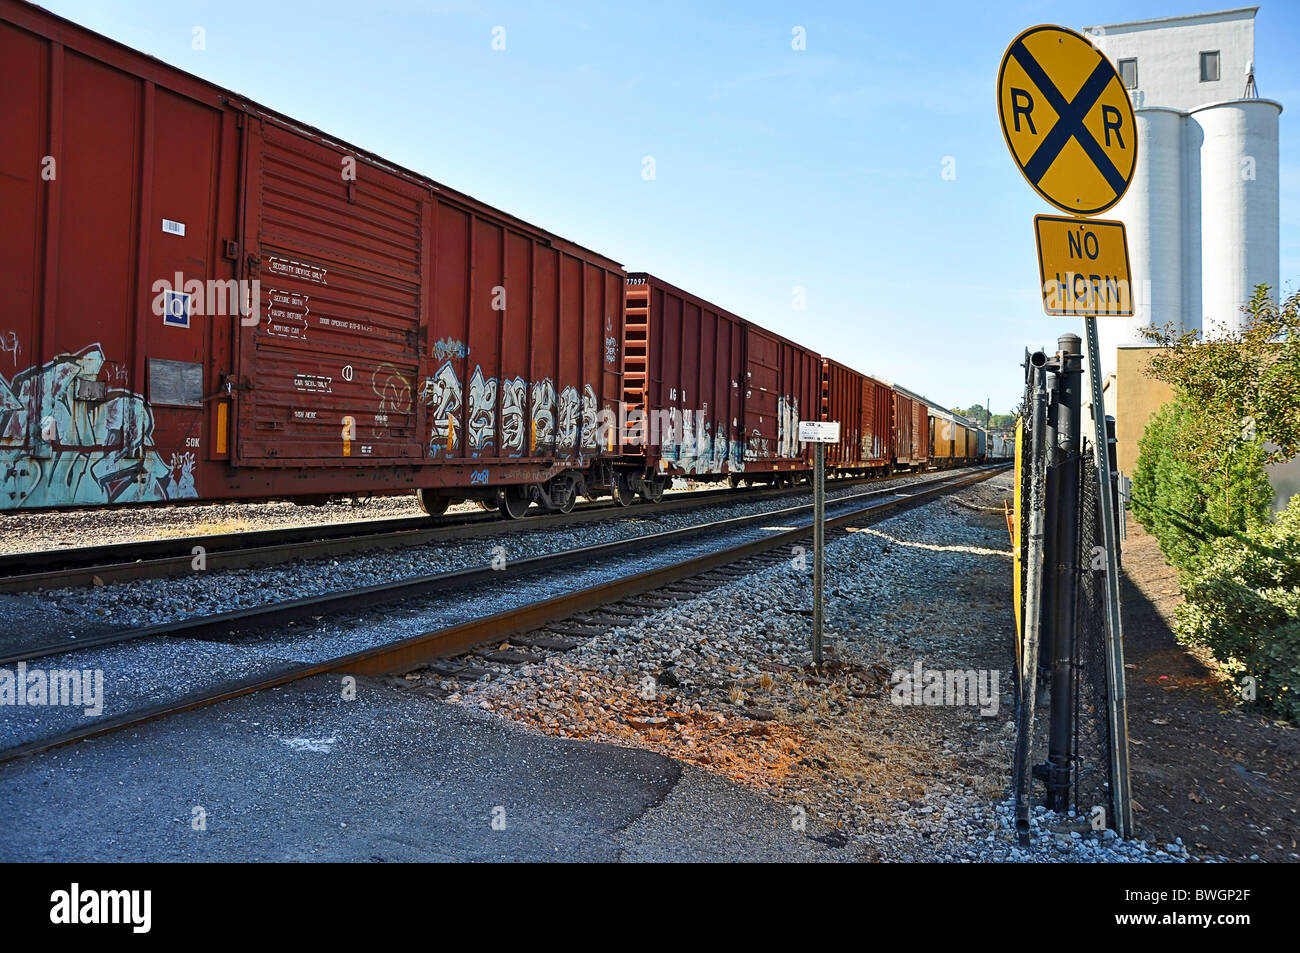 Railroad crossing showing sign and train on tracks. Stock Photo